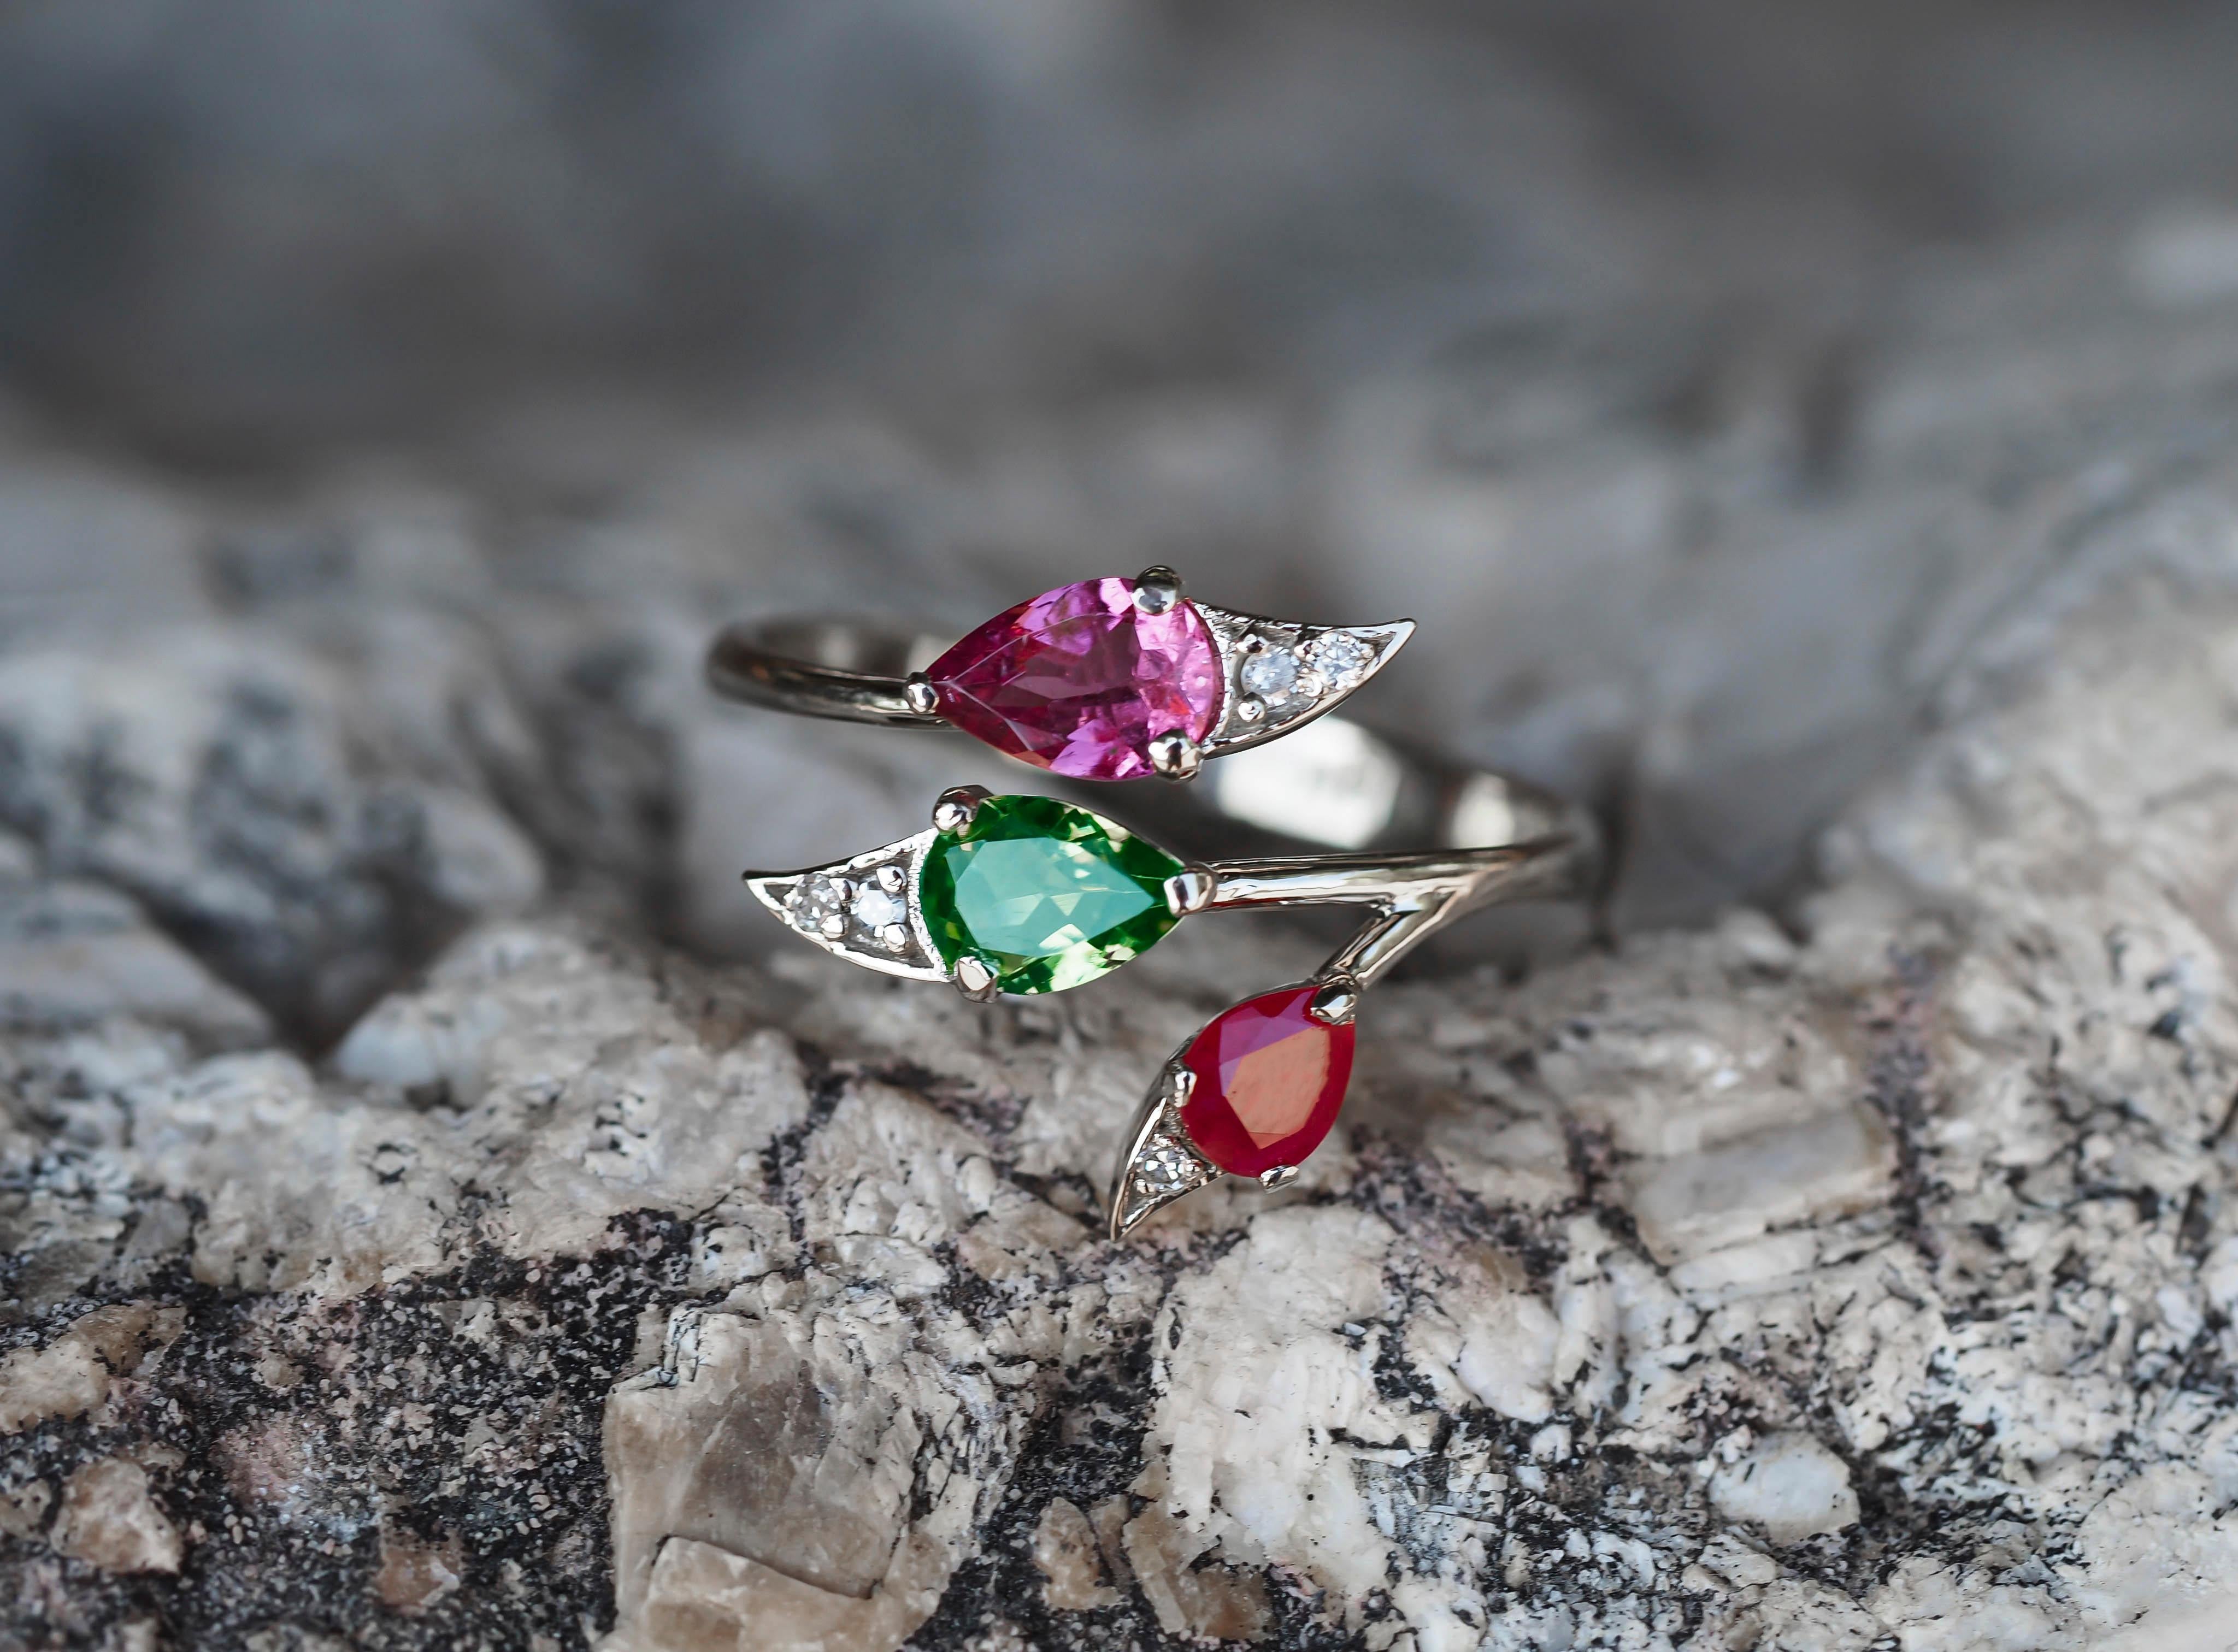 For Sale:  3 gemstone ring. Tourmalines and ruby gold ring. Multicolor gemstones ring. 15